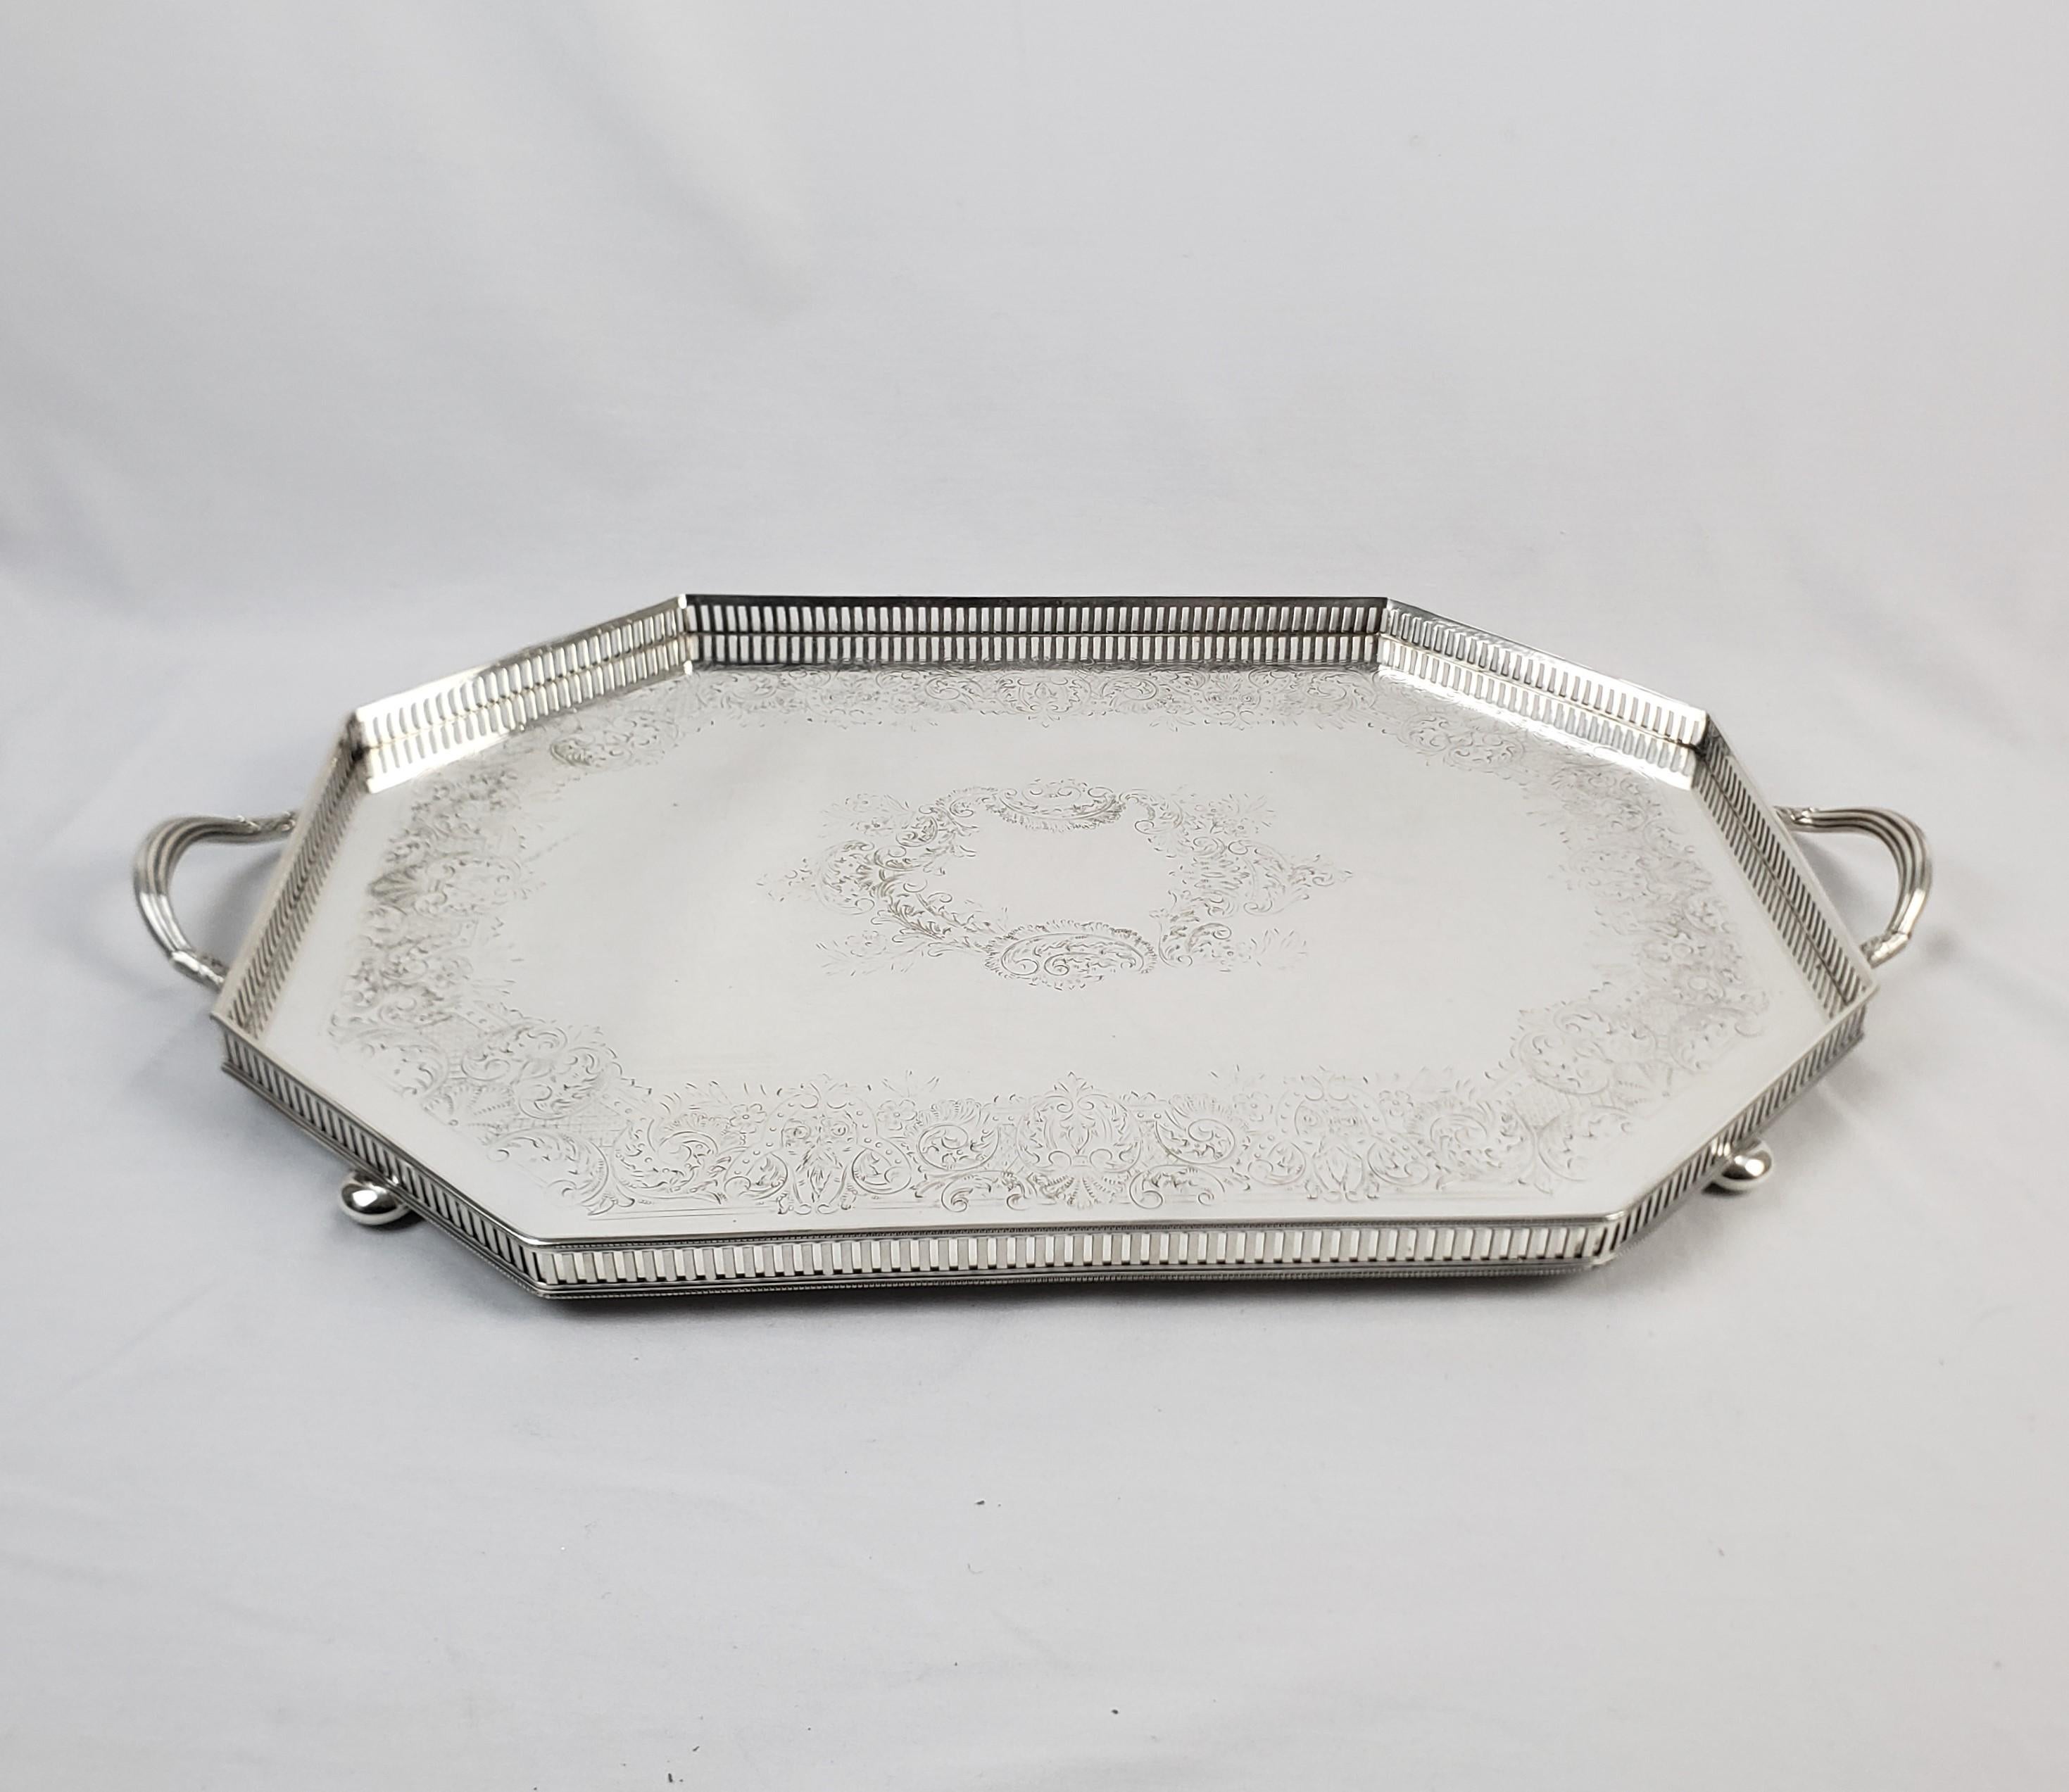 This antique serving tray was made by the well known Barker Ellis Silver Company of England and dates to approximately 1900 and done in the period Edwardian style. The tray is composed of silver plate with a small pierced gallery and engraved